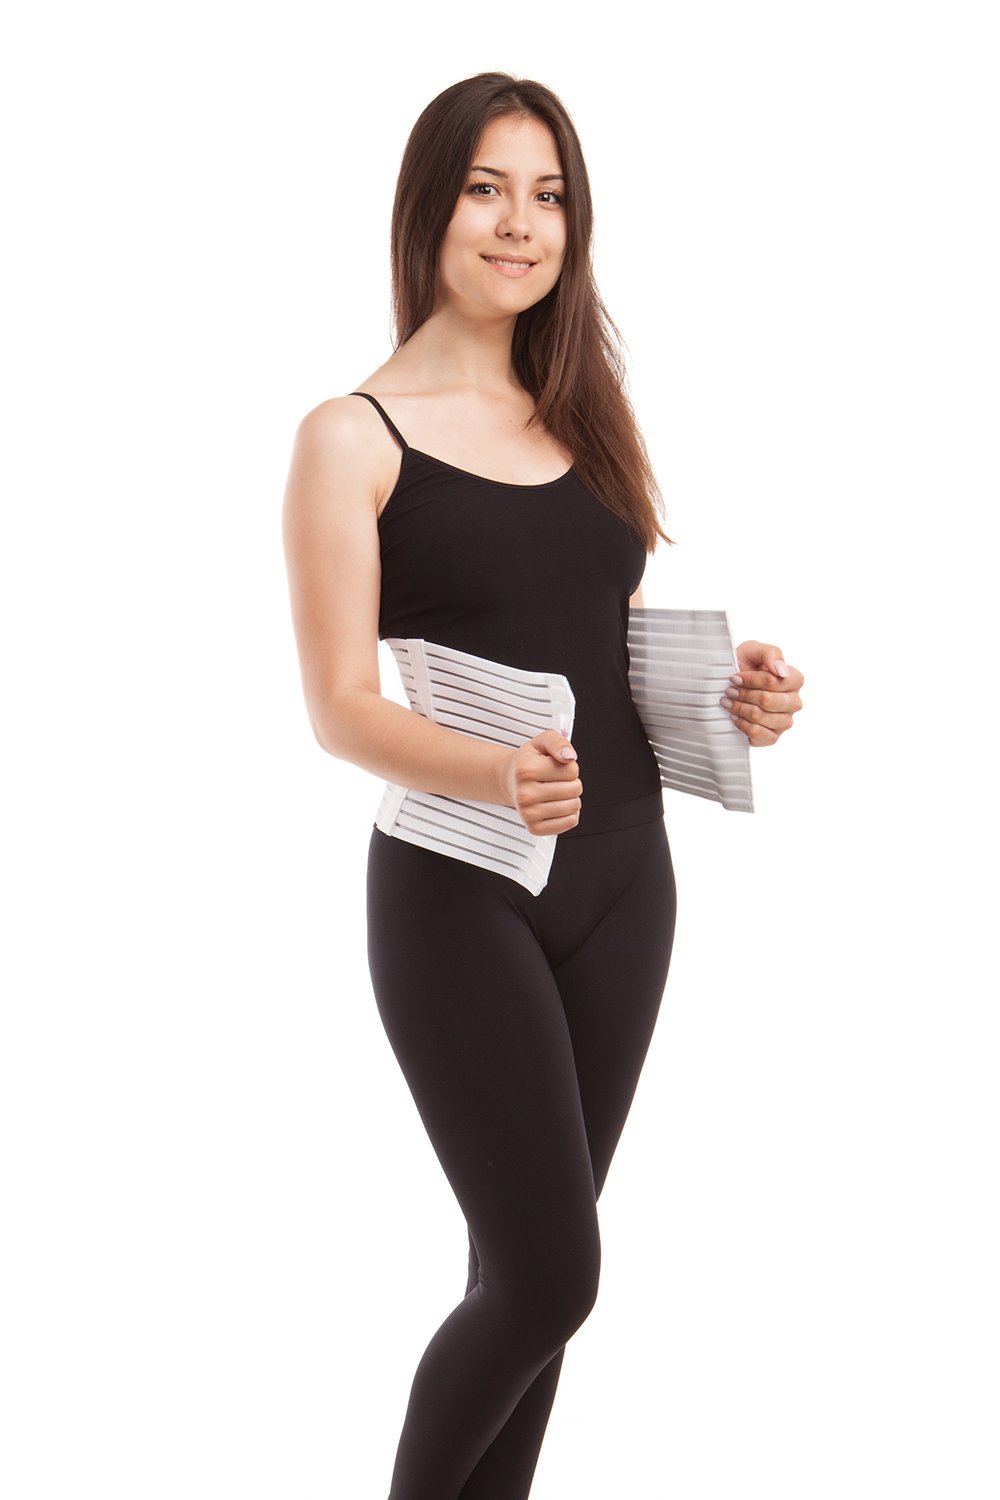  Gabrialla Abdominal Body Shaping, Back Support and Slimming  Girdle (Reduces up to Two Sizes) 2XL : Clothing, Shoes & Jewelry